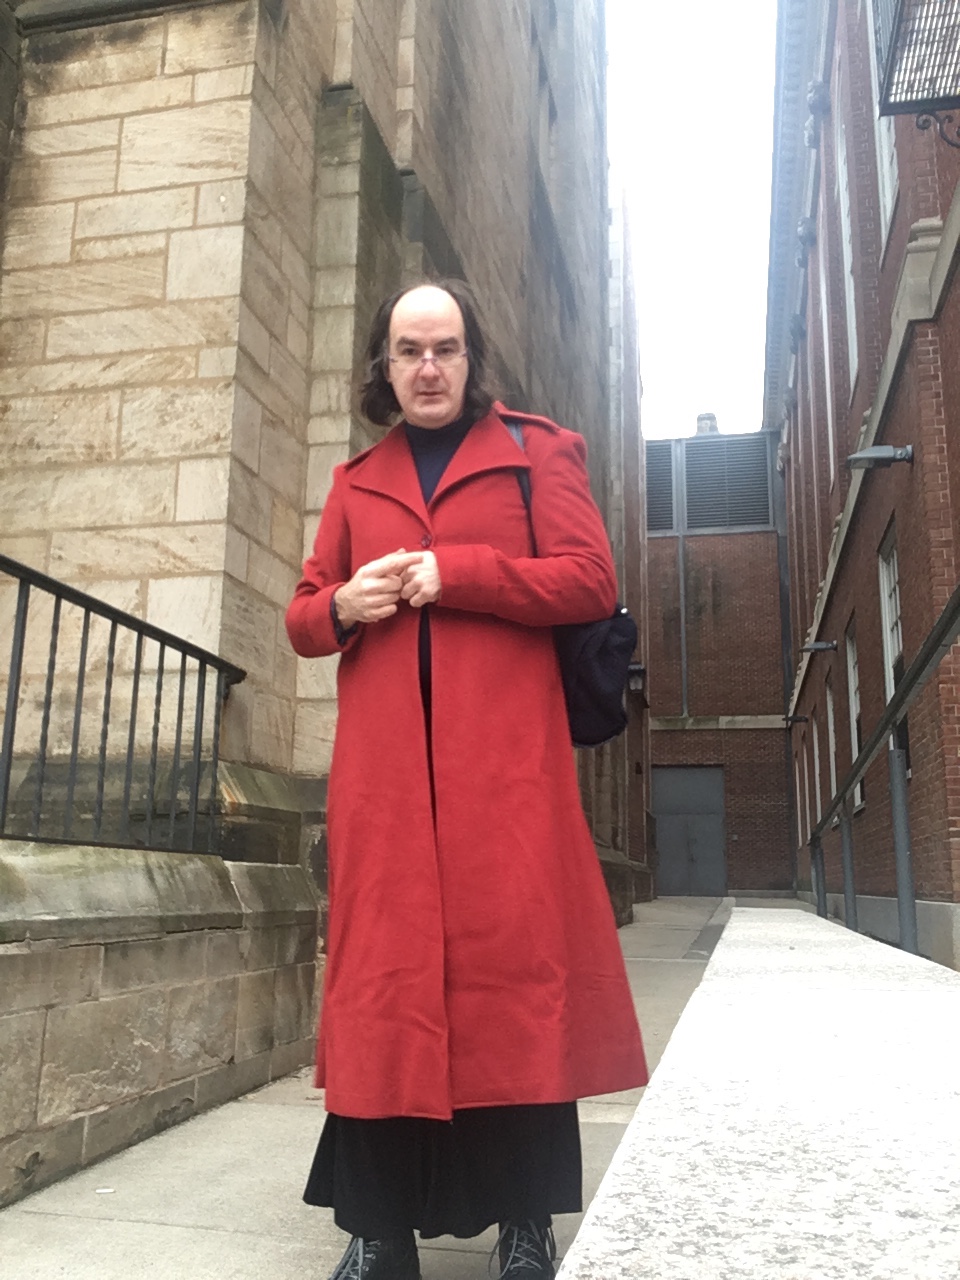 Wearing a maxi black skirt and a long red coat.